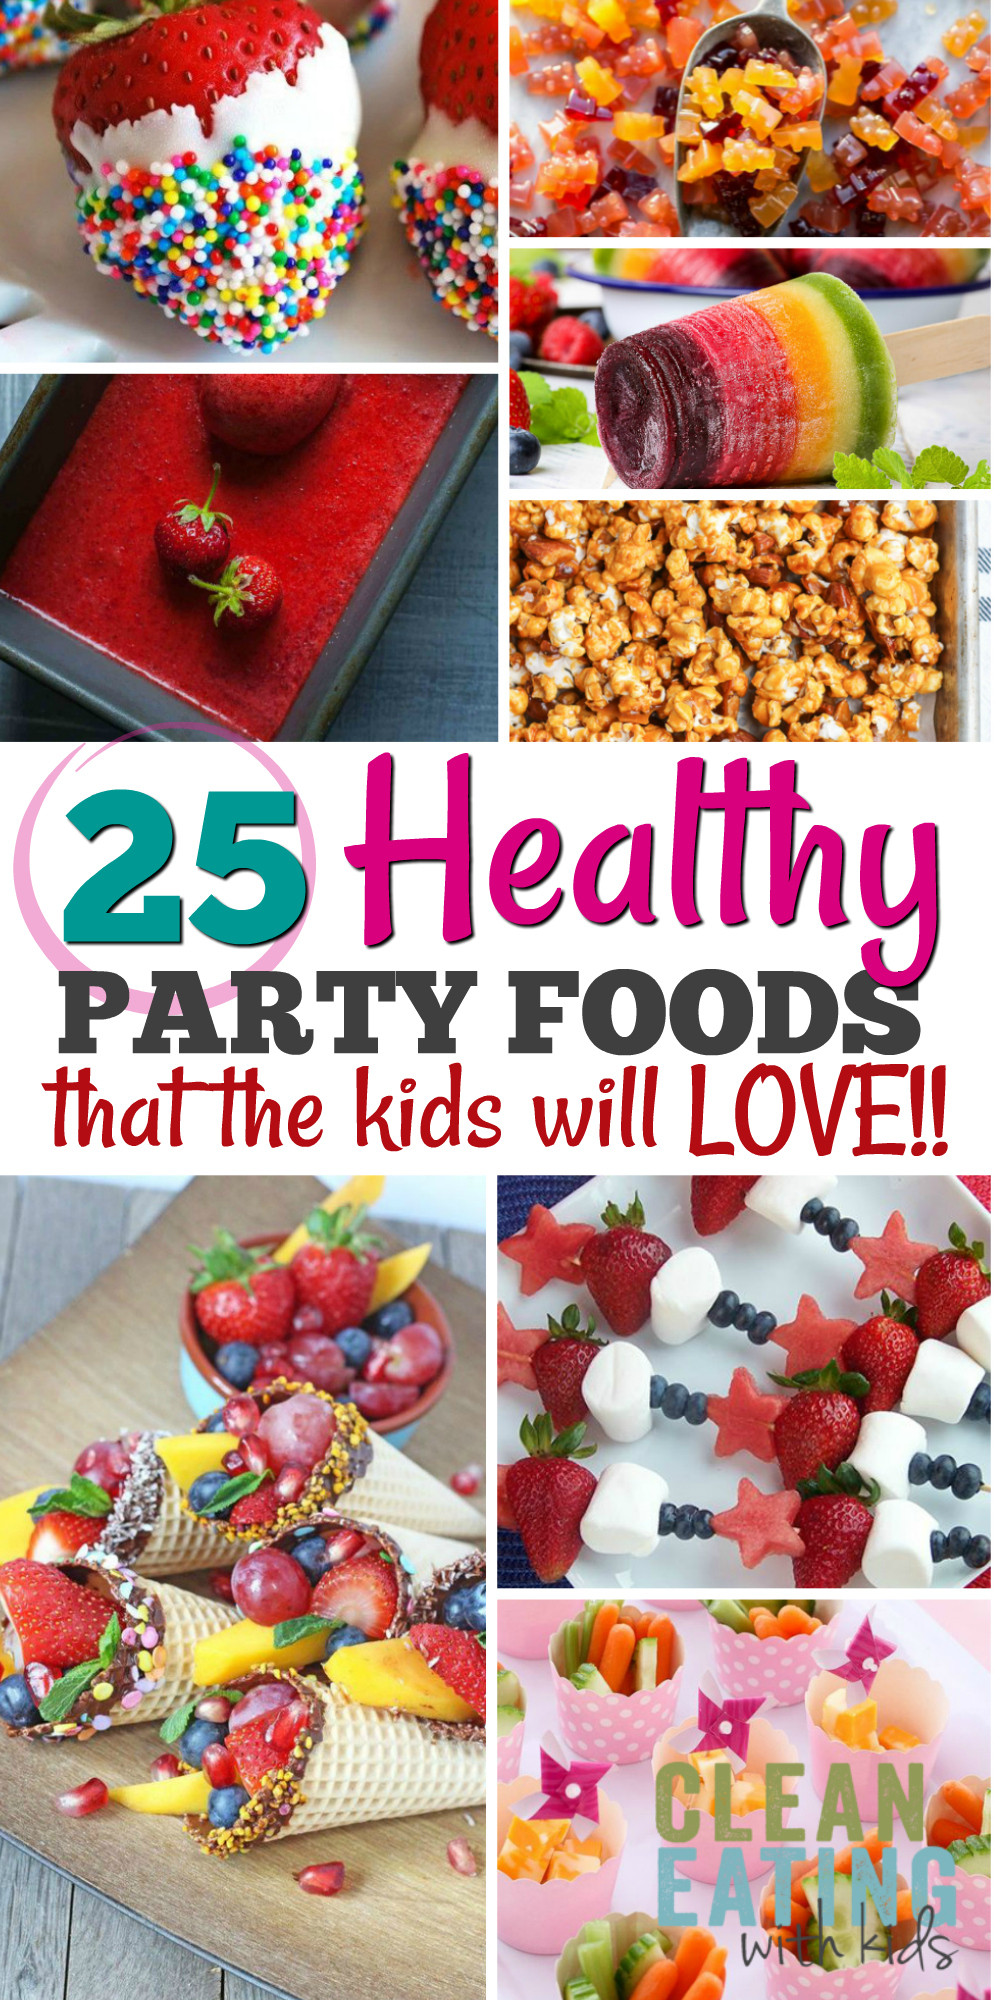 Birthday Party Menu Ideas
 25 Healthy Birthday Party Food Ideas Clean Eating with kids